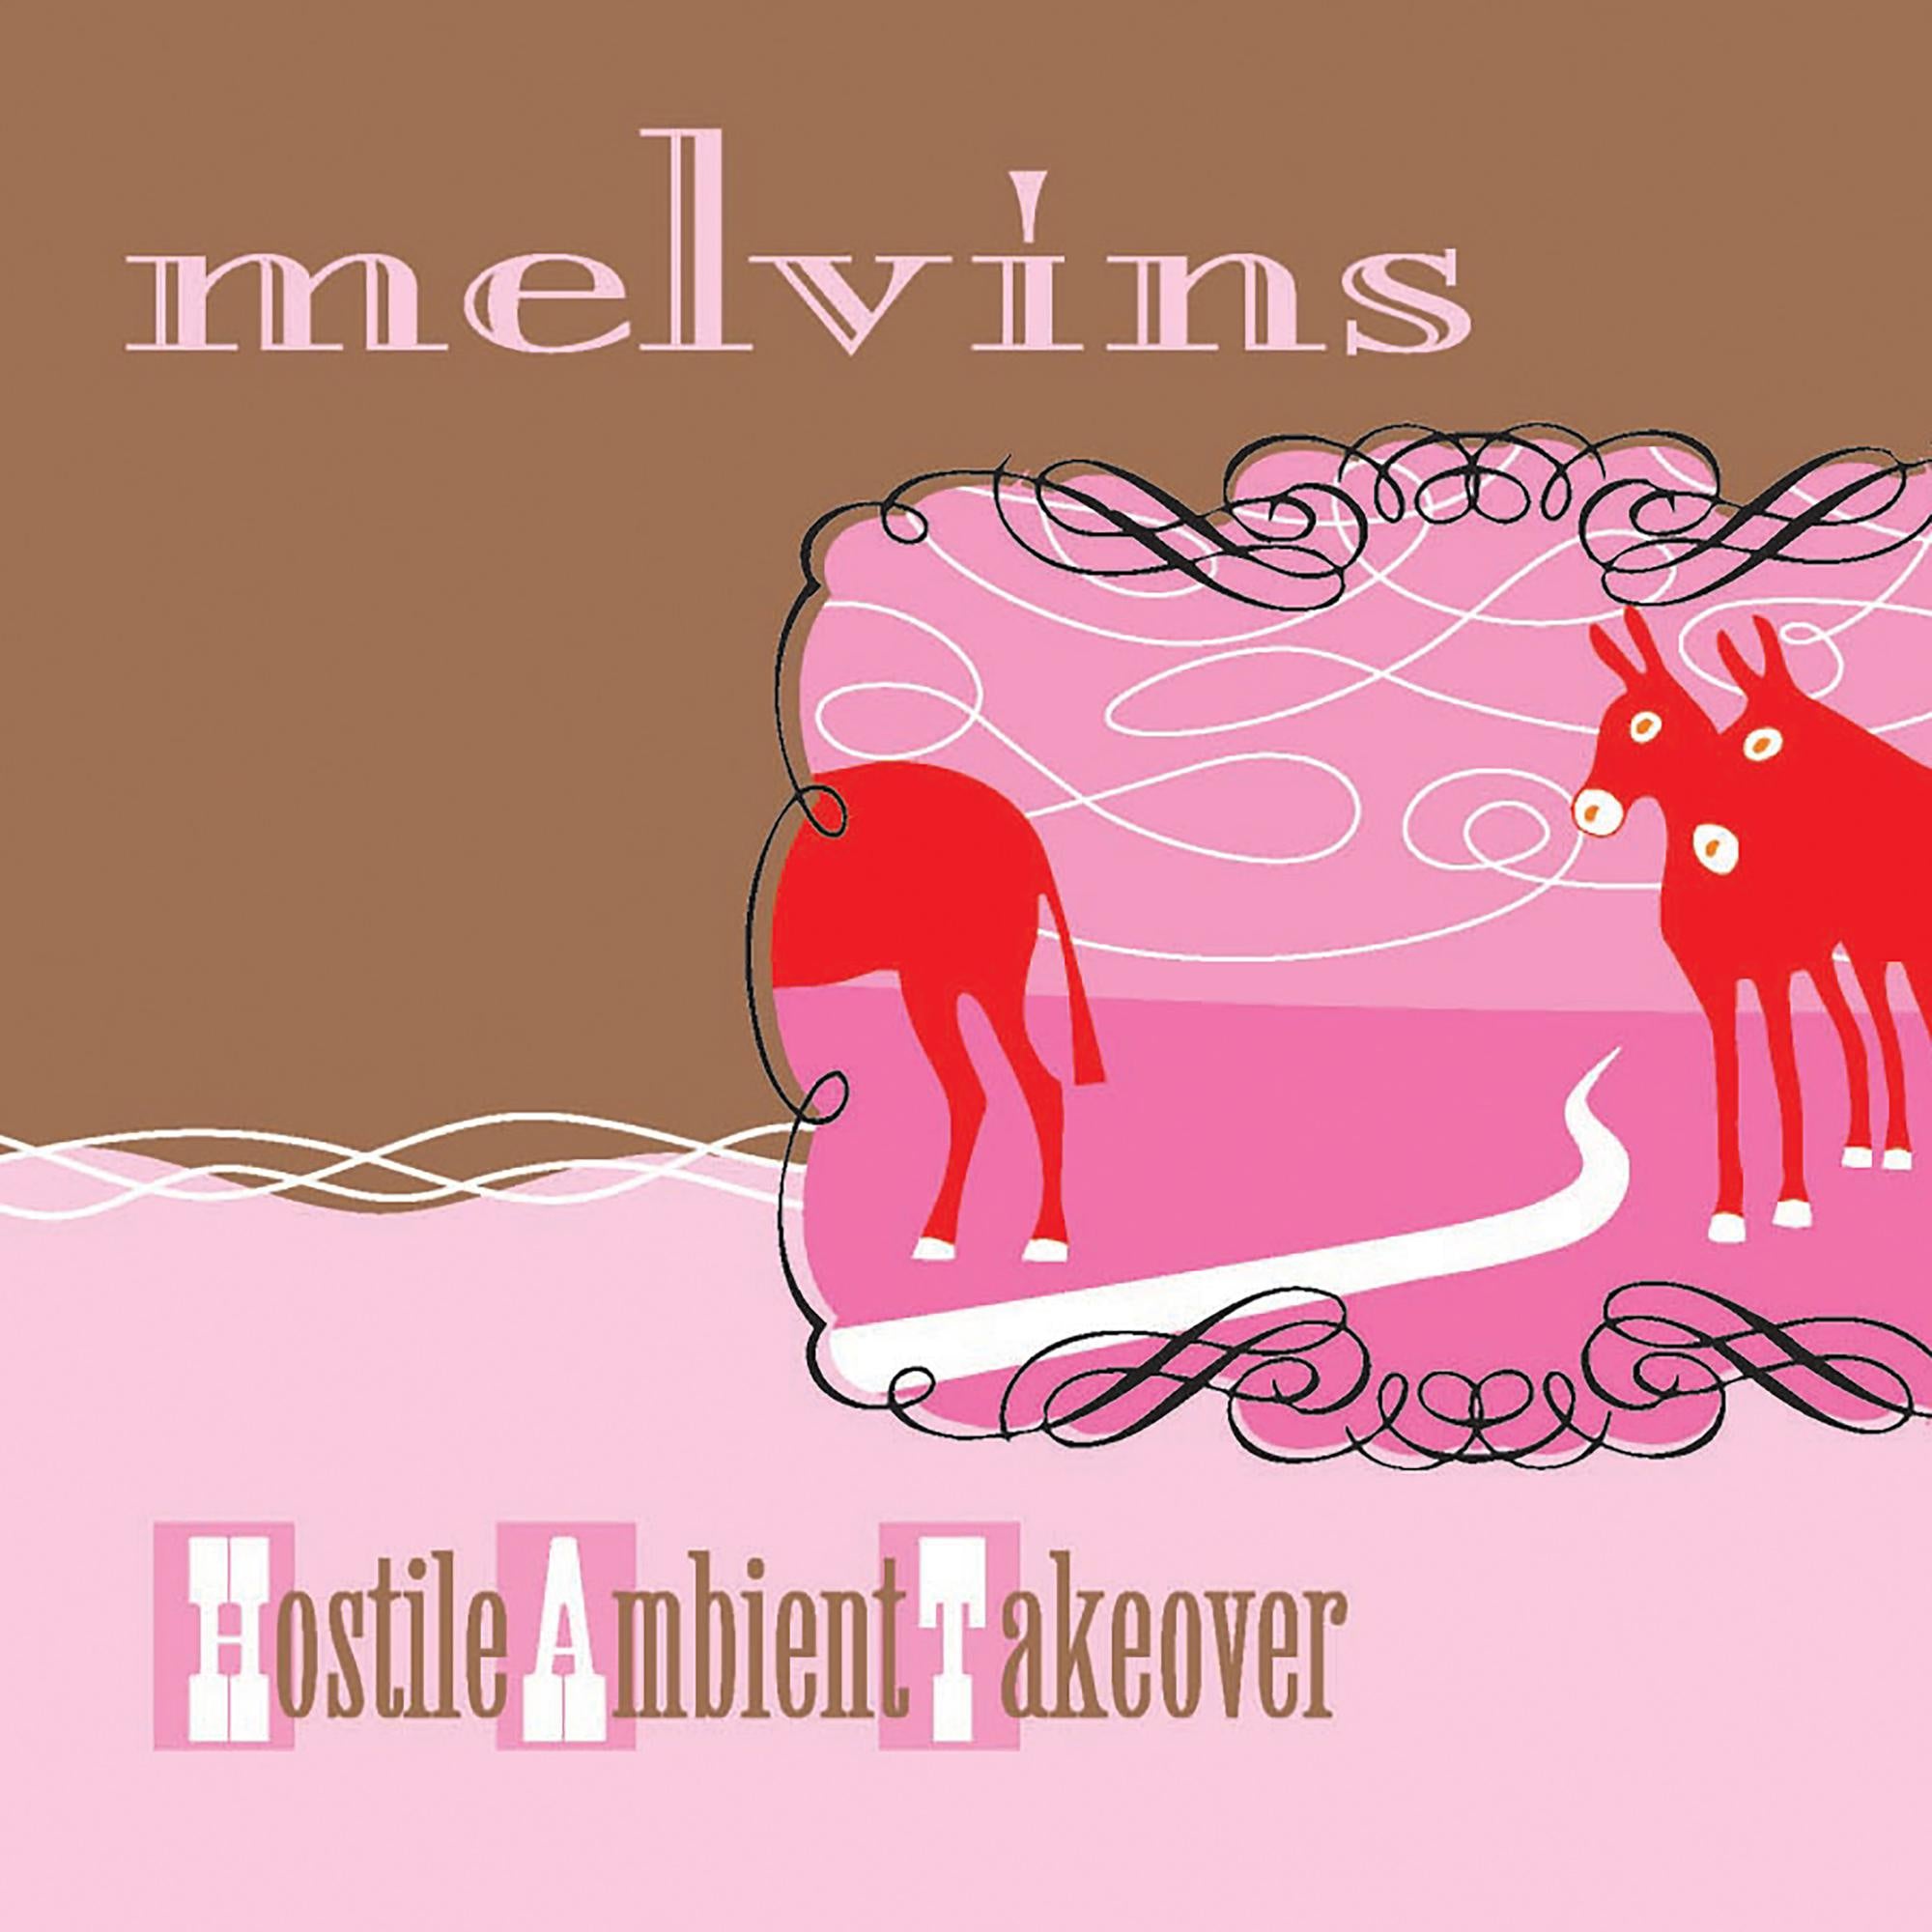 Melvins – Hostile Ambient Takeover (2002) - New LP Record 2021 New LP Record 2021 Ipecac Limited Baby Pink Vinyl - Rock / Grudge